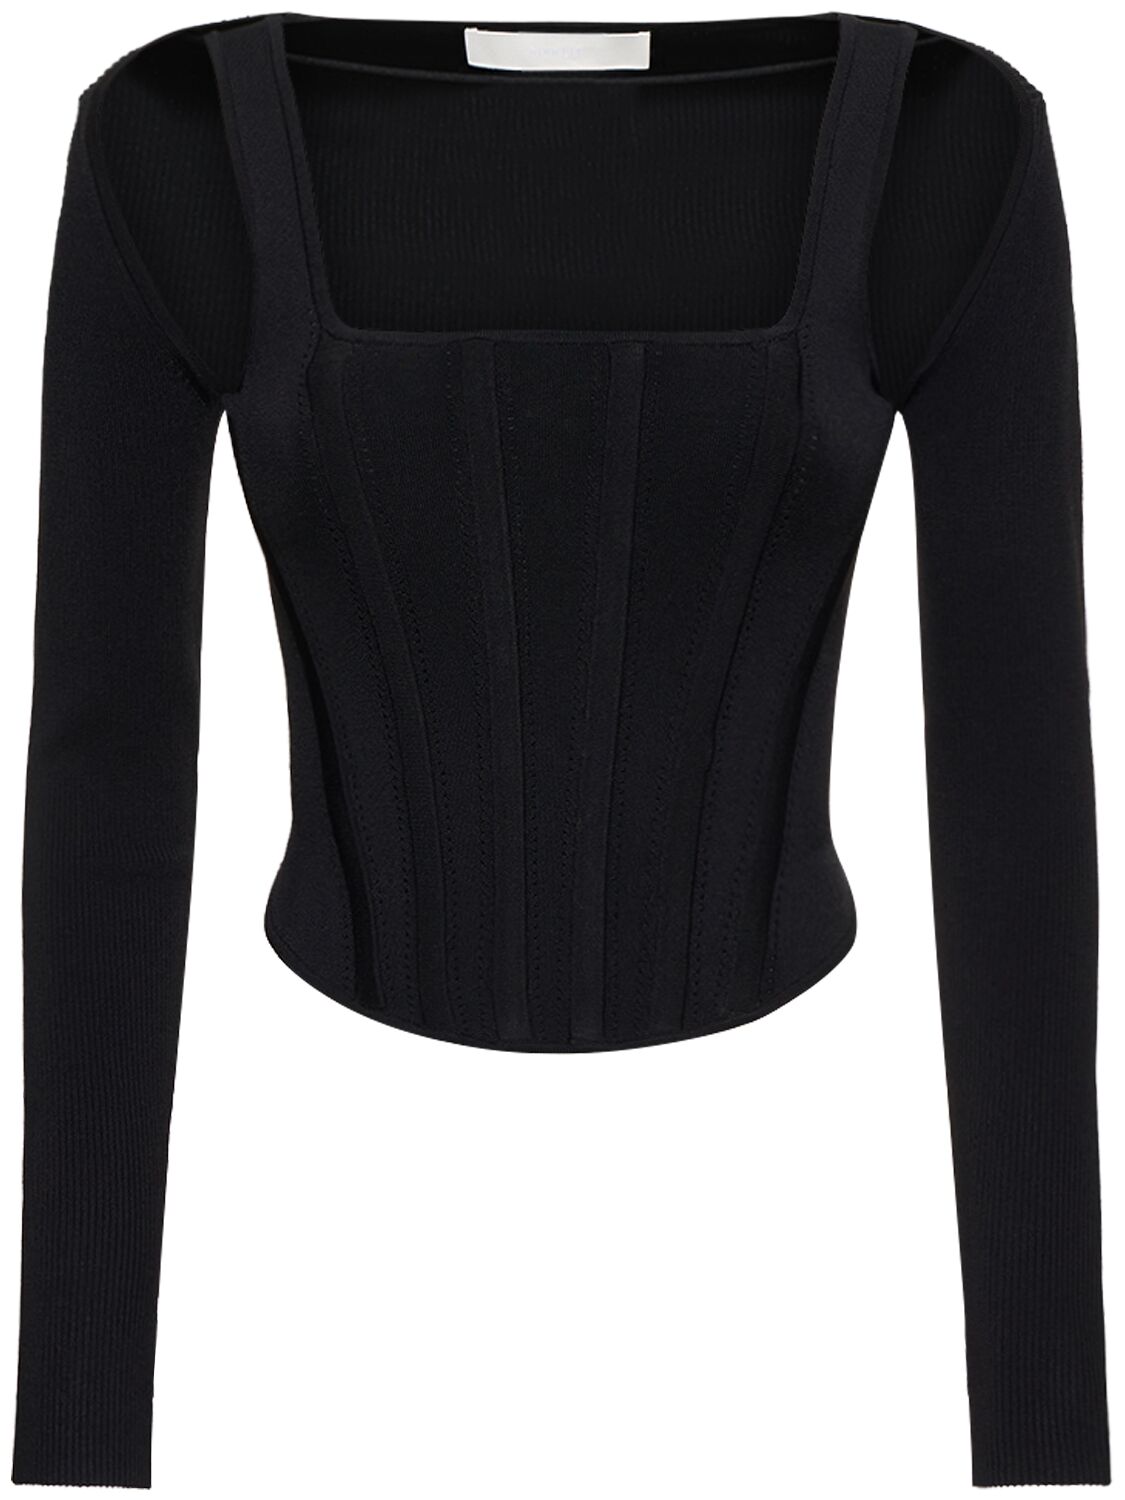 Dion Lee Corset Crop Top W/removable Sleeves In Black